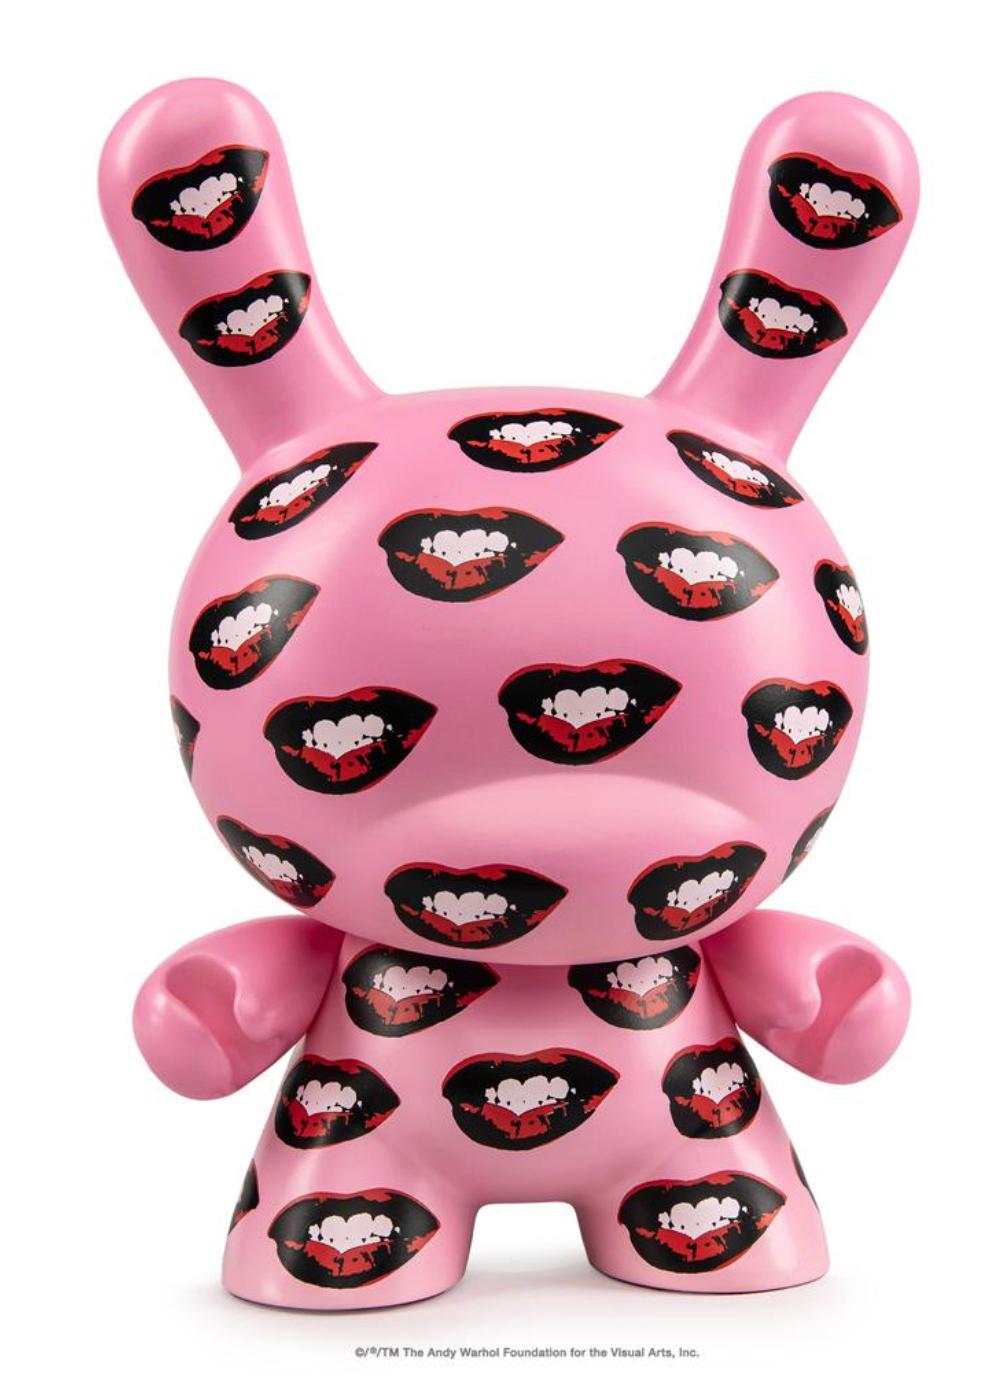 (after) Andy Warhol Figurative Sculpture - Kidrobot X Andy Warhol Foundation 4 ft Marilyn Kiss Dunny Sculpture 